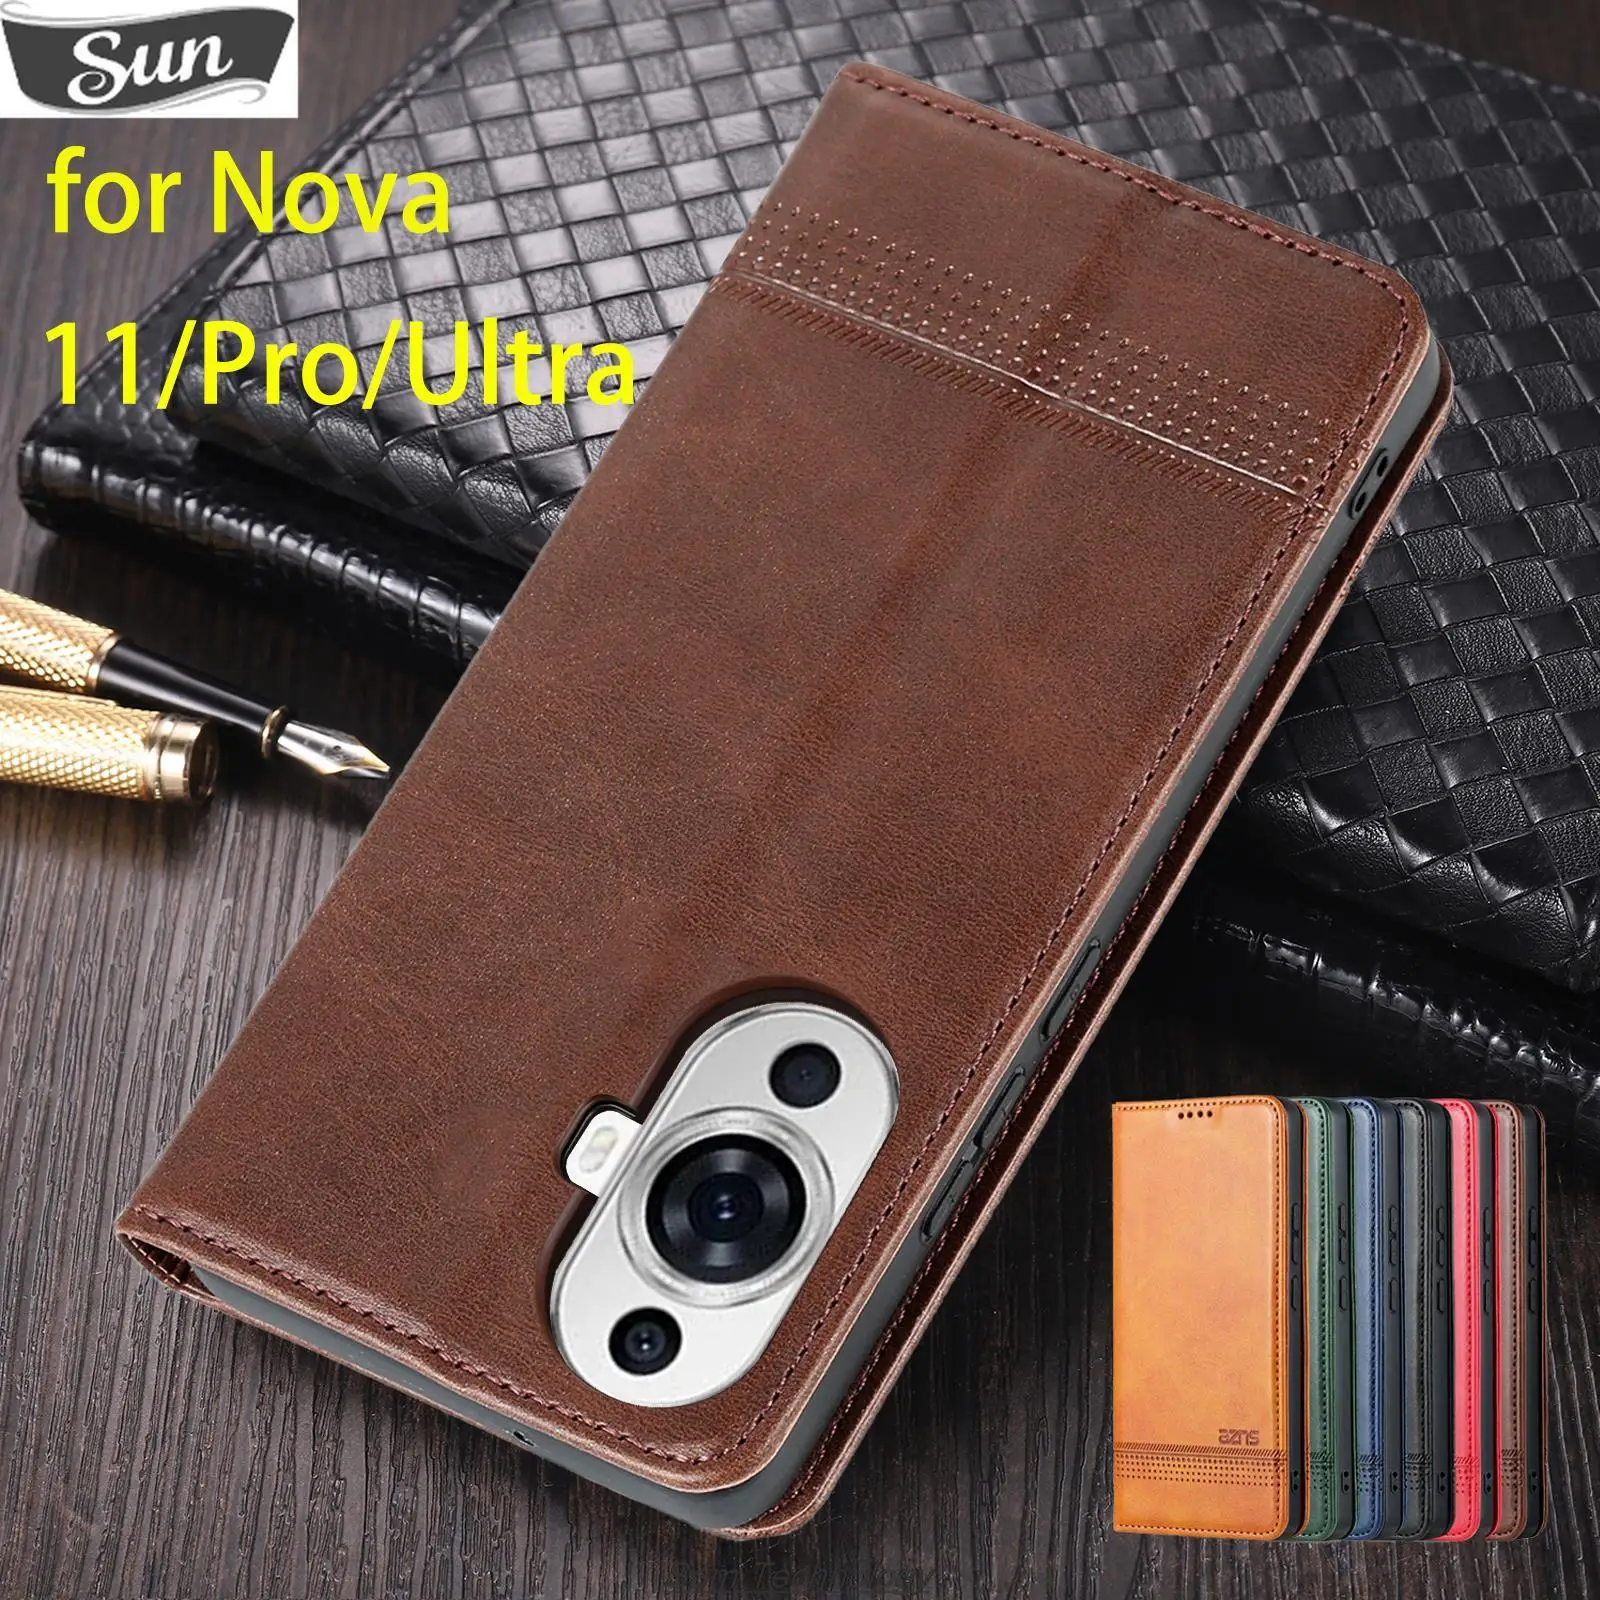 

Deluxe Magnetic Adsorption Leather Fitted Case for Huawei Nova 11 Nova11 Pro Ultra Flip Cover Protective Case Fundas Coque